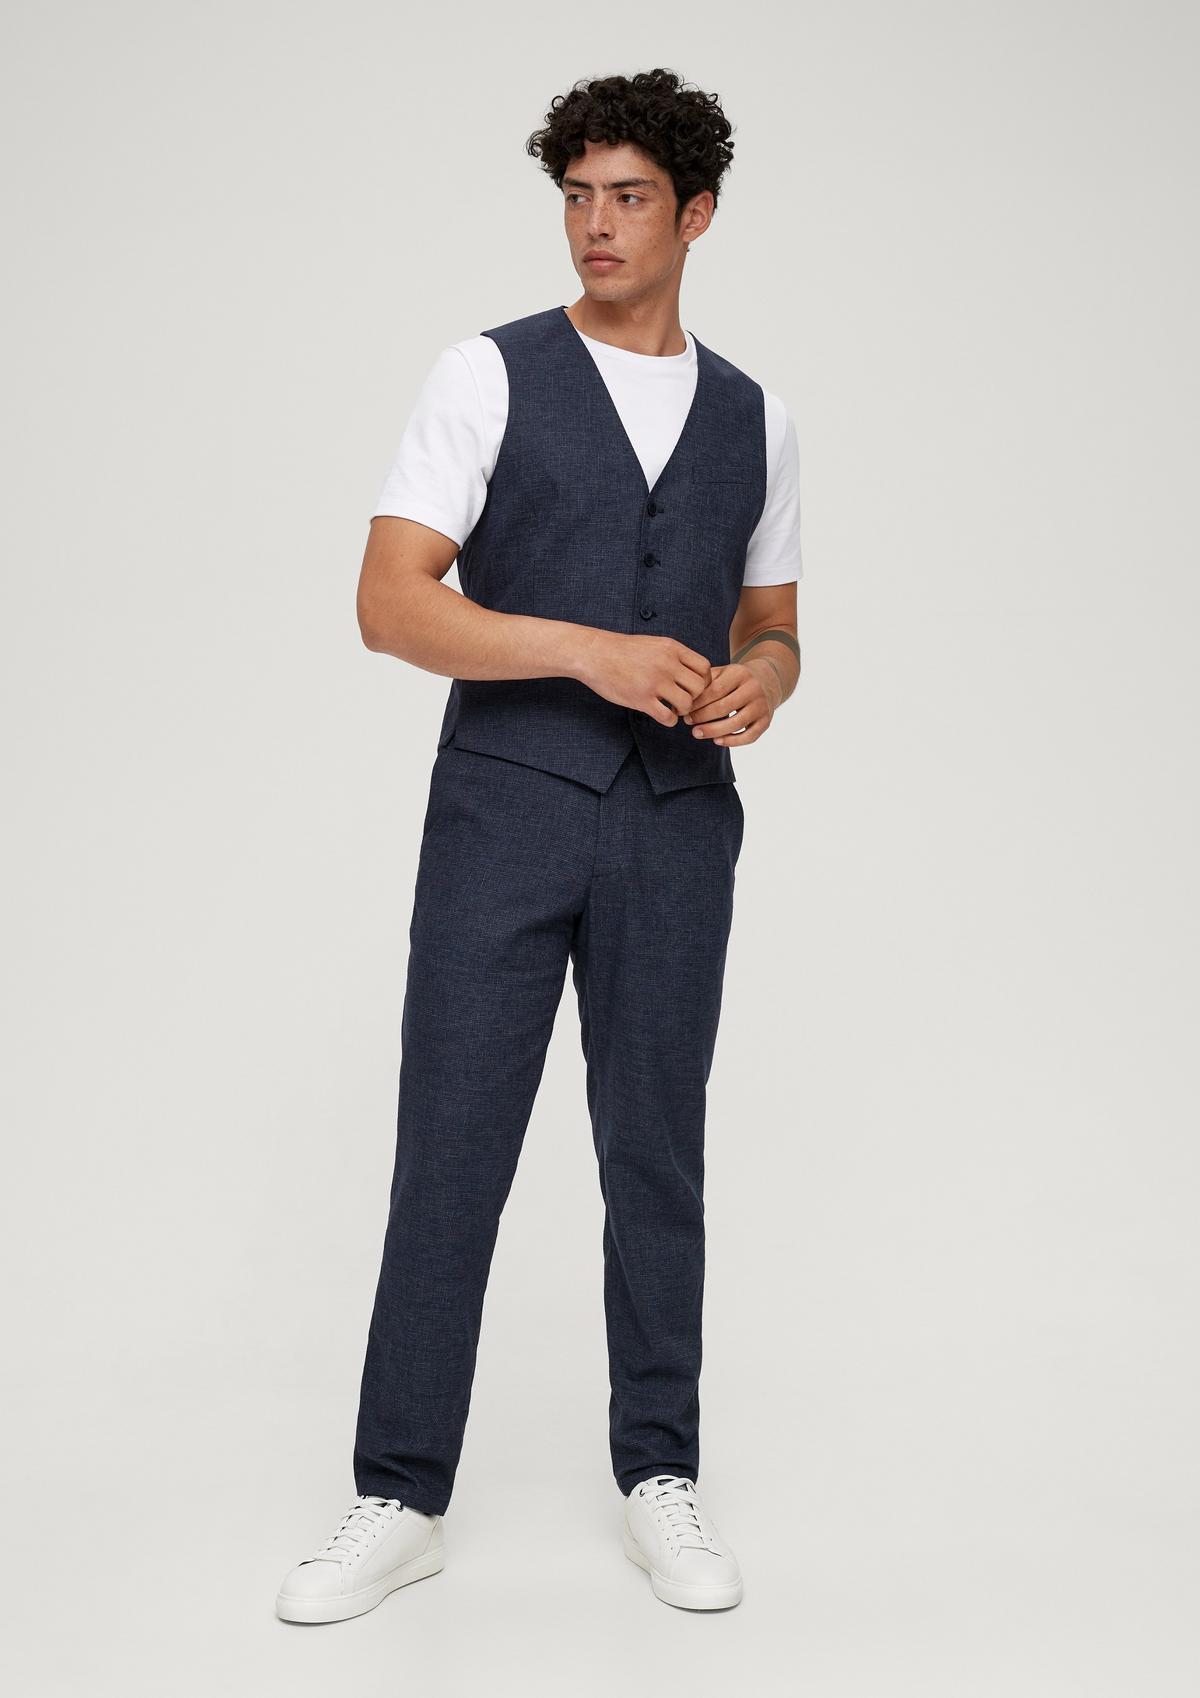 s.Oliver Slim fit: trousers with a fine check pattern